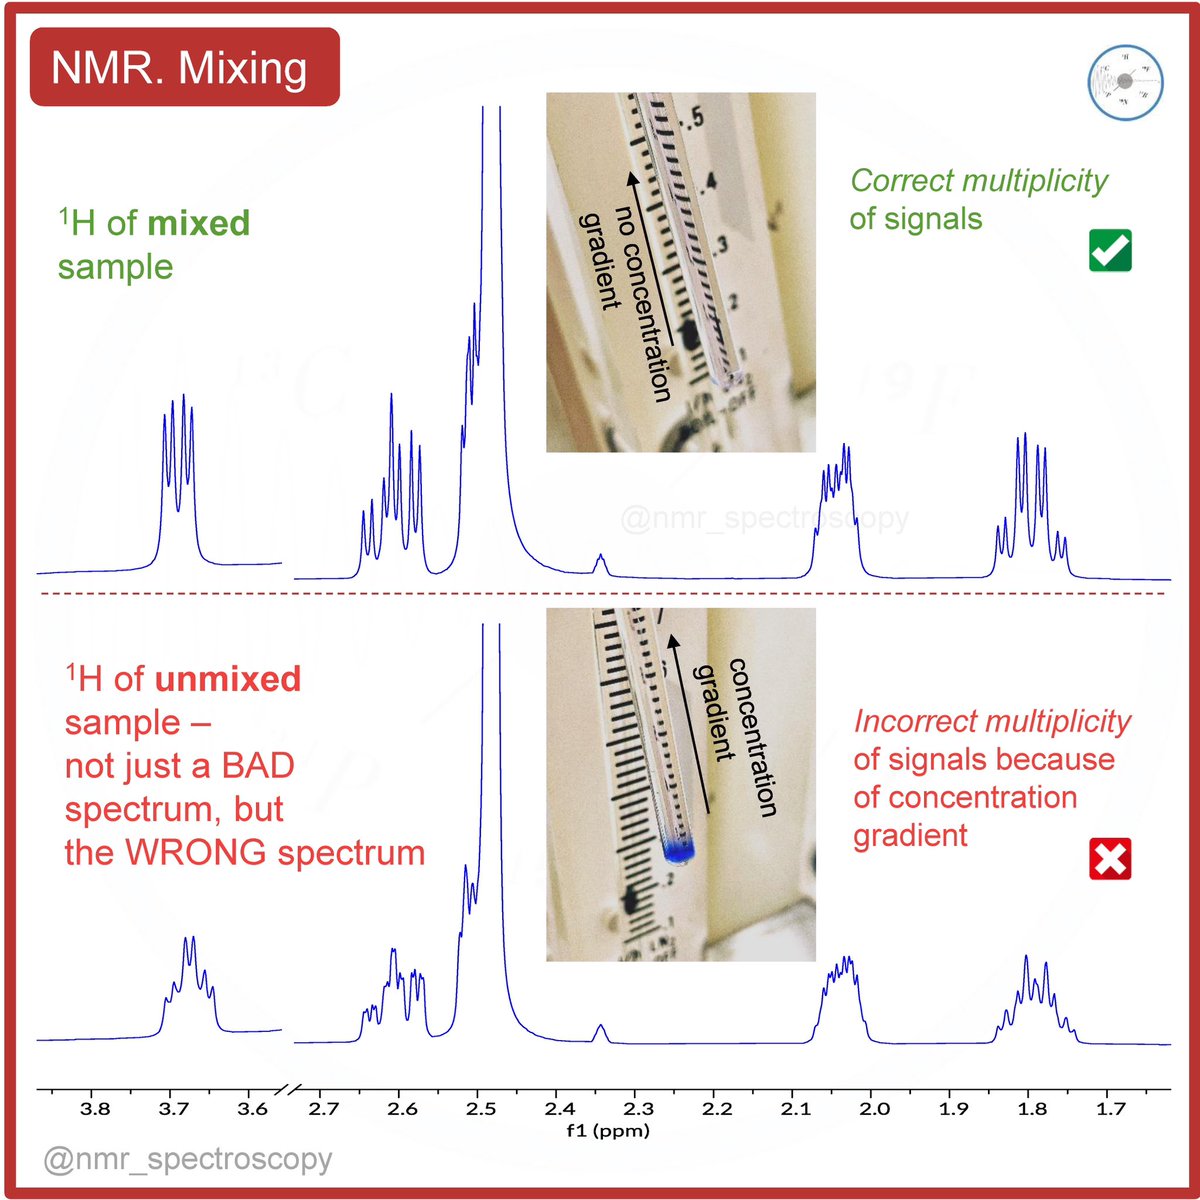 🧪🧲 Mix It Up! The Vital Step for Optimal NMR Spectroscopy Results. 
#NMR #nmrchat
Attention all NMR spectroscopy enthusiasts! If you want to ensure high-quality spectra, it all starts with sample mixing. 
#chemtwitter #nuclearmagneticresonance